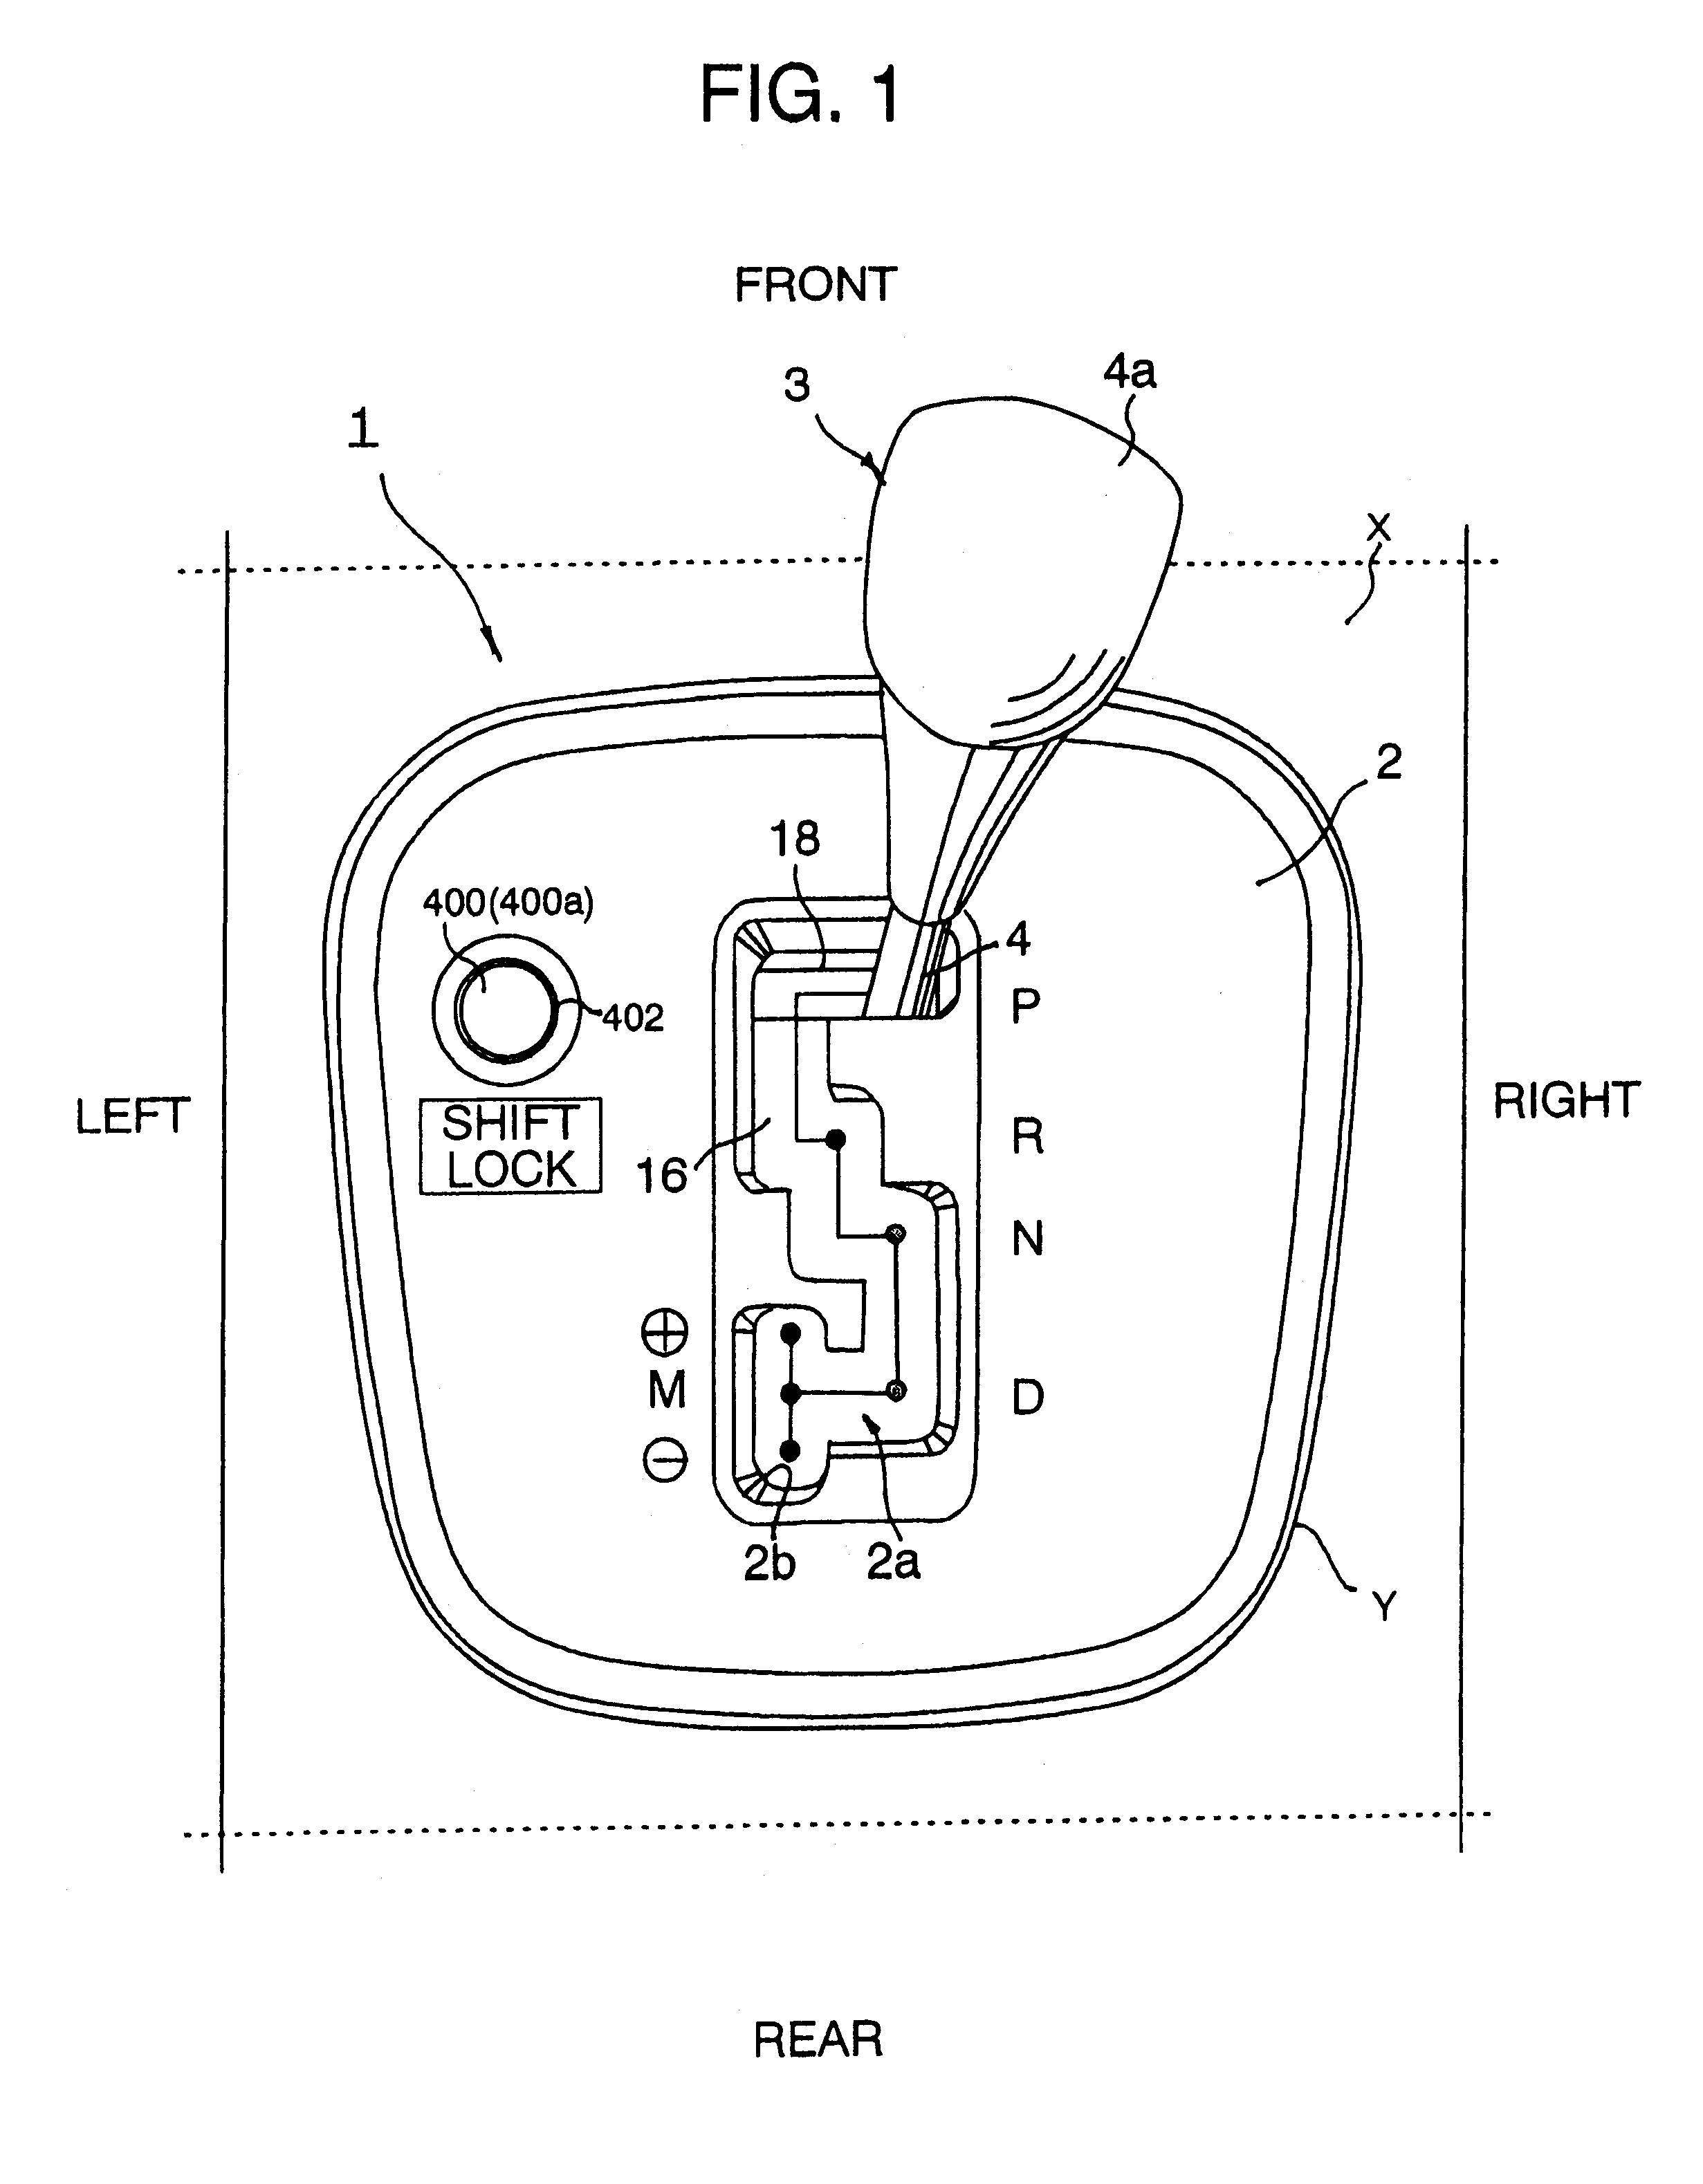 Shift select lever device for manually-shiftable automatic transmission